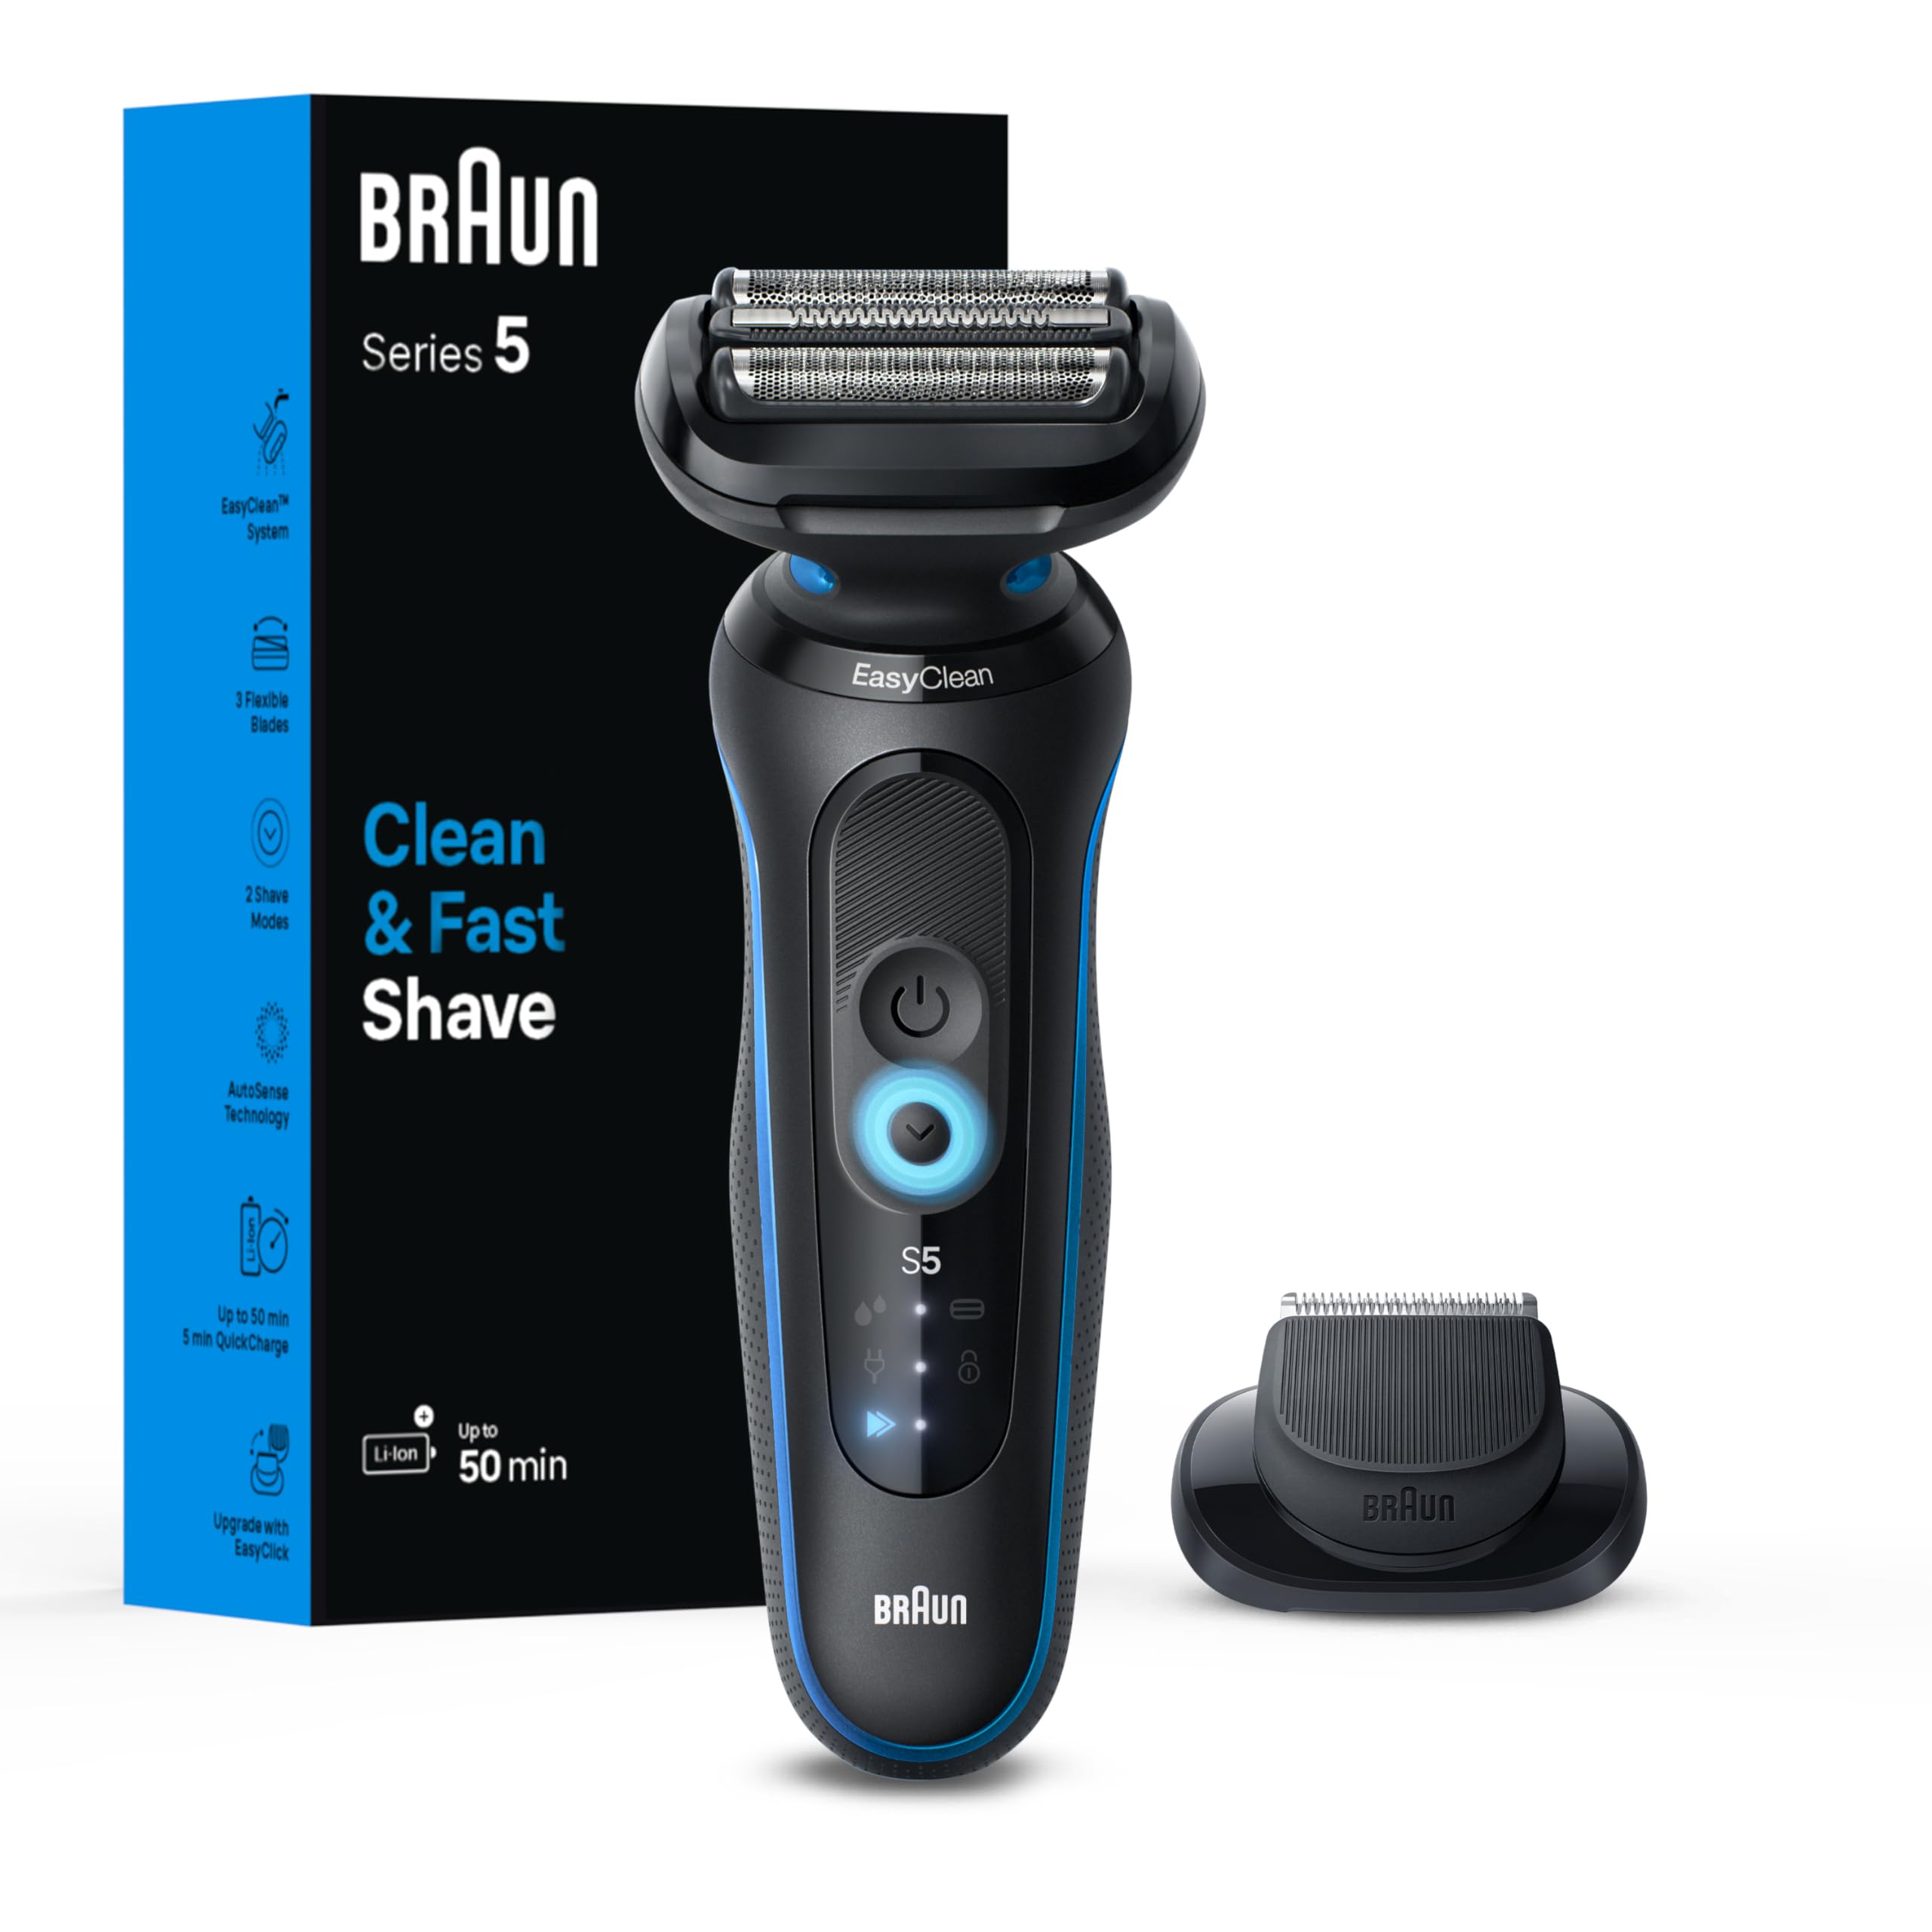 Braun Electric Shaver for Men, Series 5 5118s, Wet & Dry Shave, Turbo Shaving Mode, Foil Shaver, Engineered in Germany, with Precision Trimmer, Blue